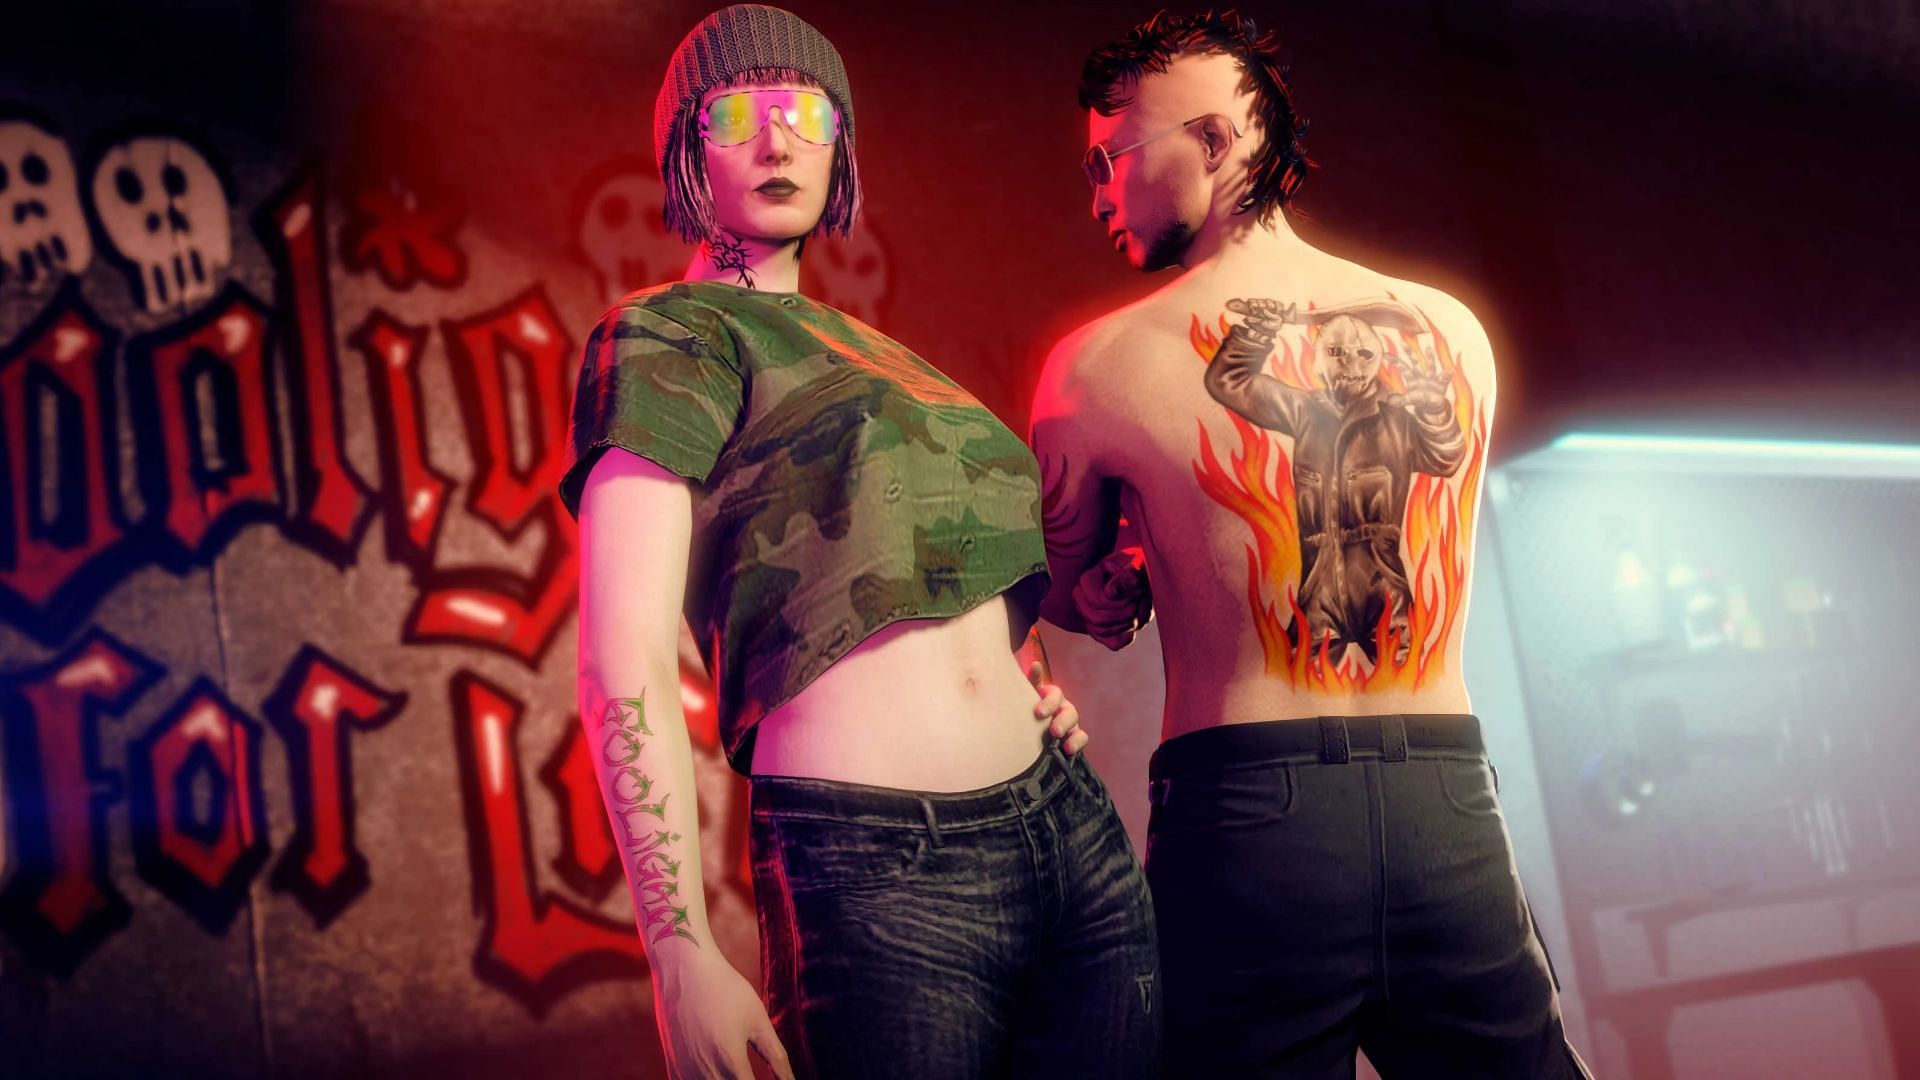 The Freakshop is also a place where you can socialize with others (Image via Rockstar Games)